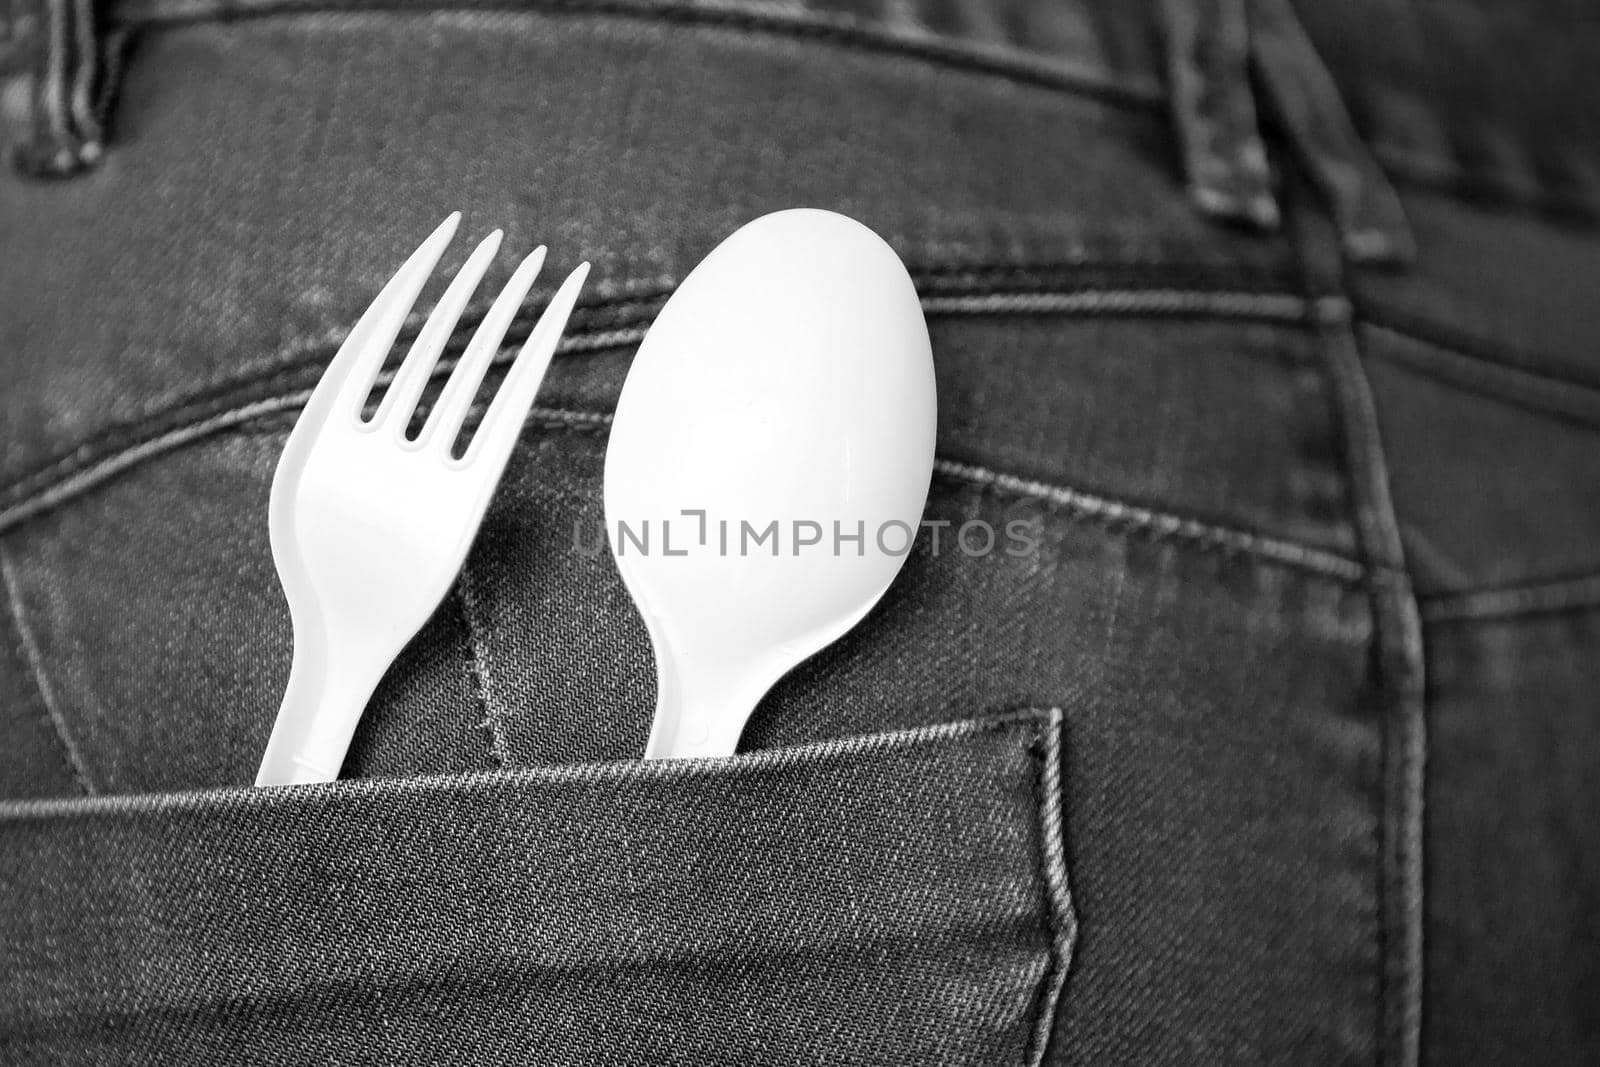 reusable plastic spoon and fork at the pocket. safe environment. Take Out Food Concept with Denim Jeans with a white Fork and Spoon in the Pocket. fast food concept.